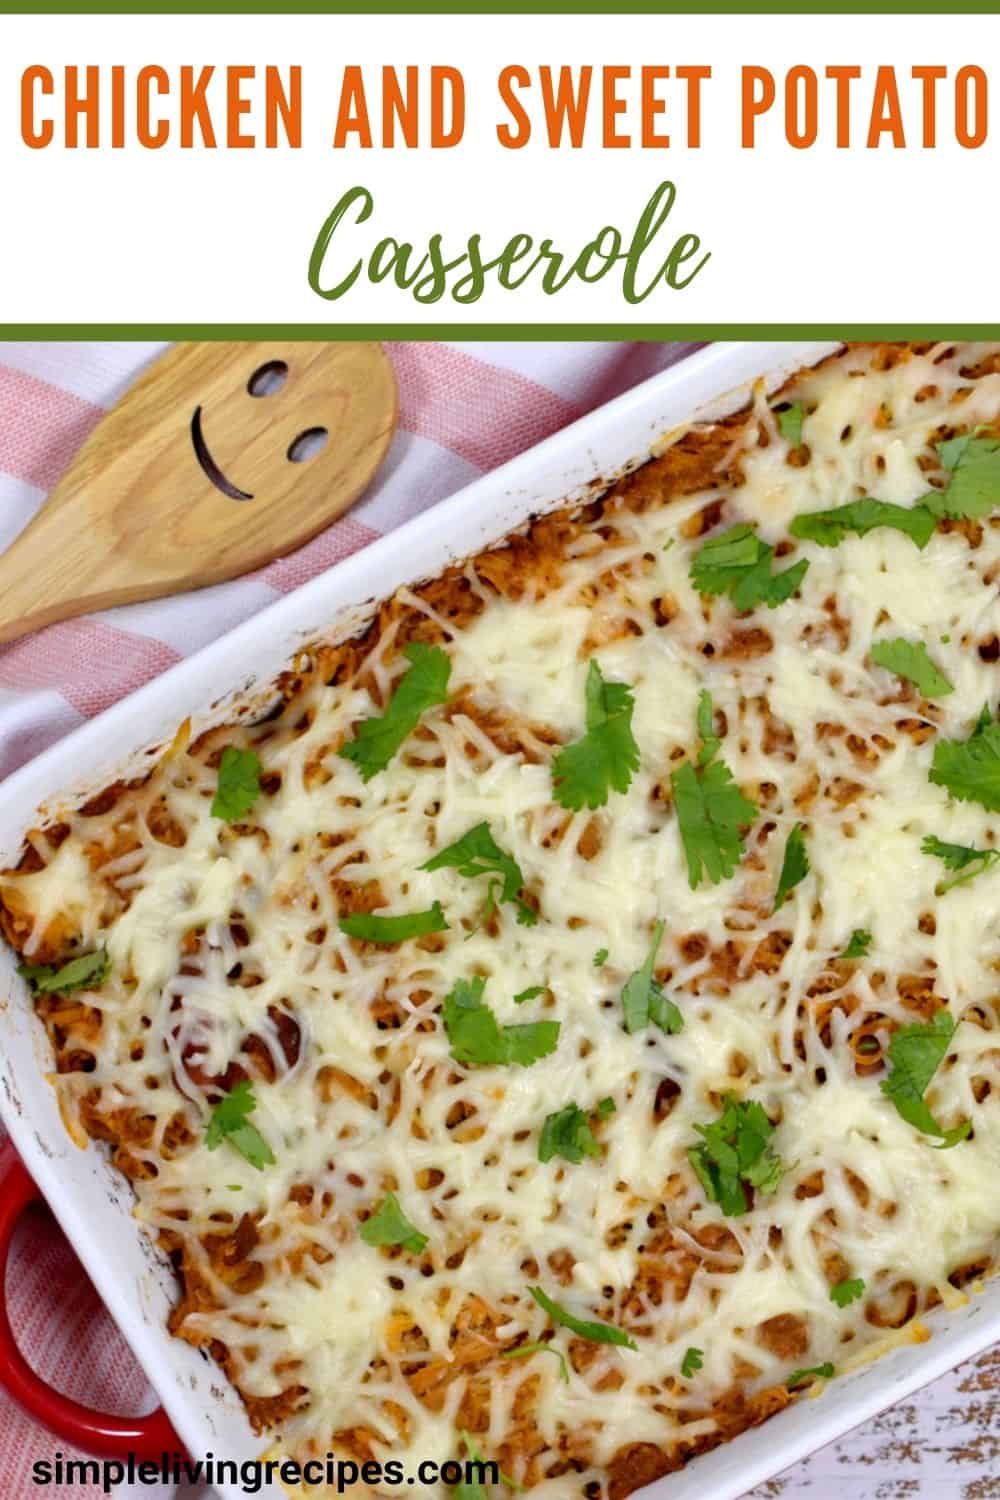 Pin for Pinterest showing the chicken and sweet potato casserole with a wooden spoon on the side